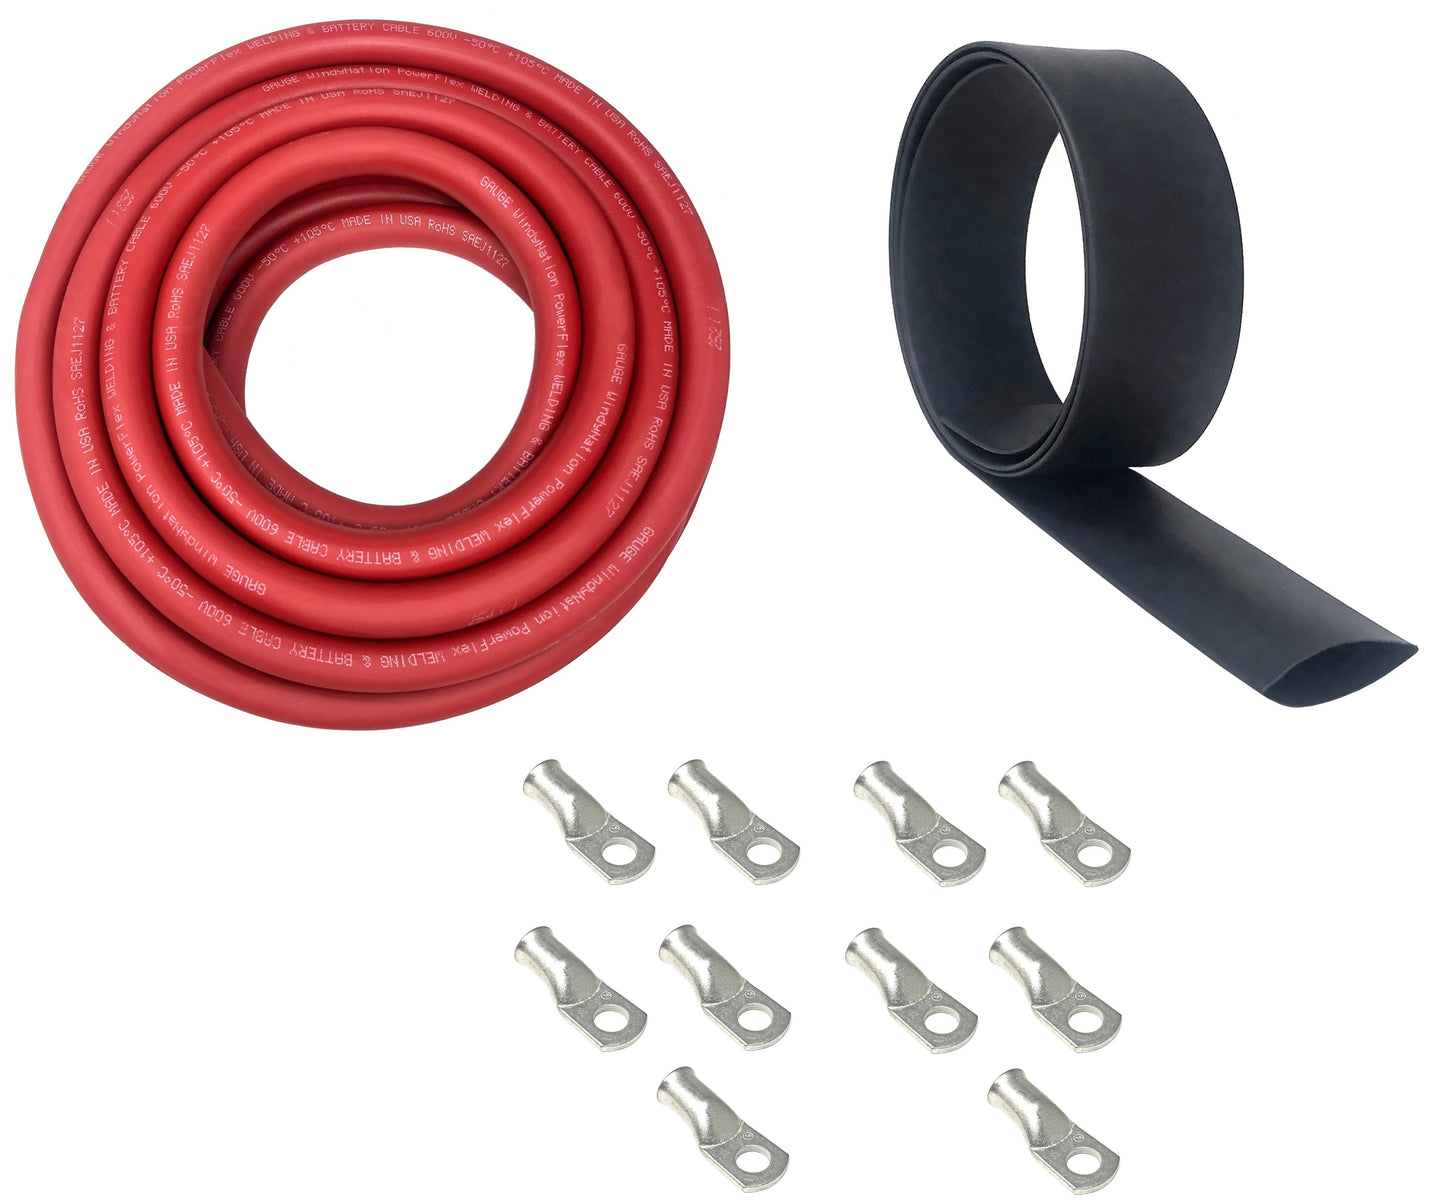 red welding cable with lugs and heat shrink